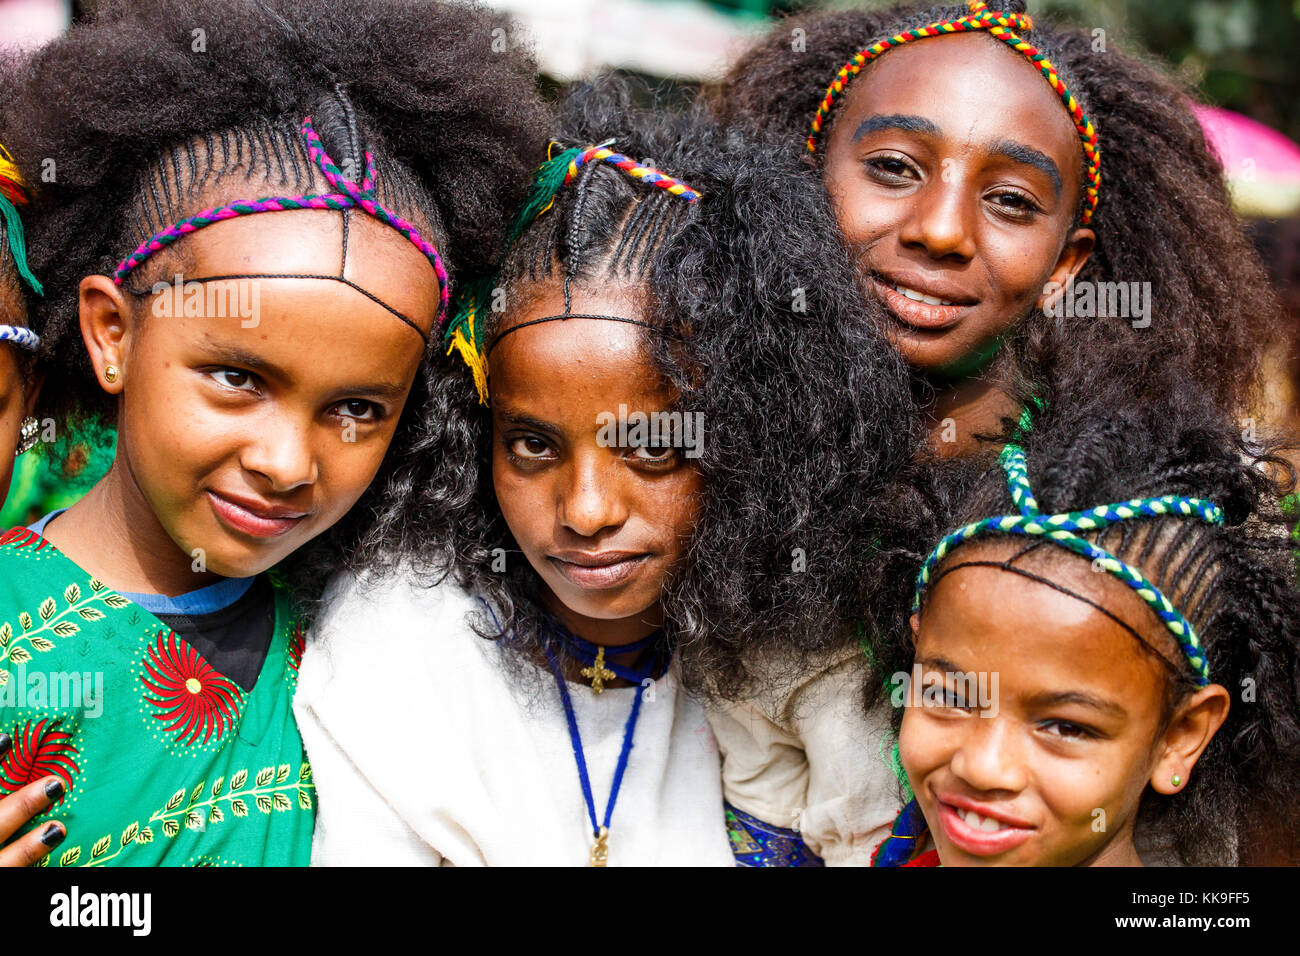 Girls at the Ashenda festival, dressed in traditional clothes and wearing Tigray style braided hair. Stock Photo